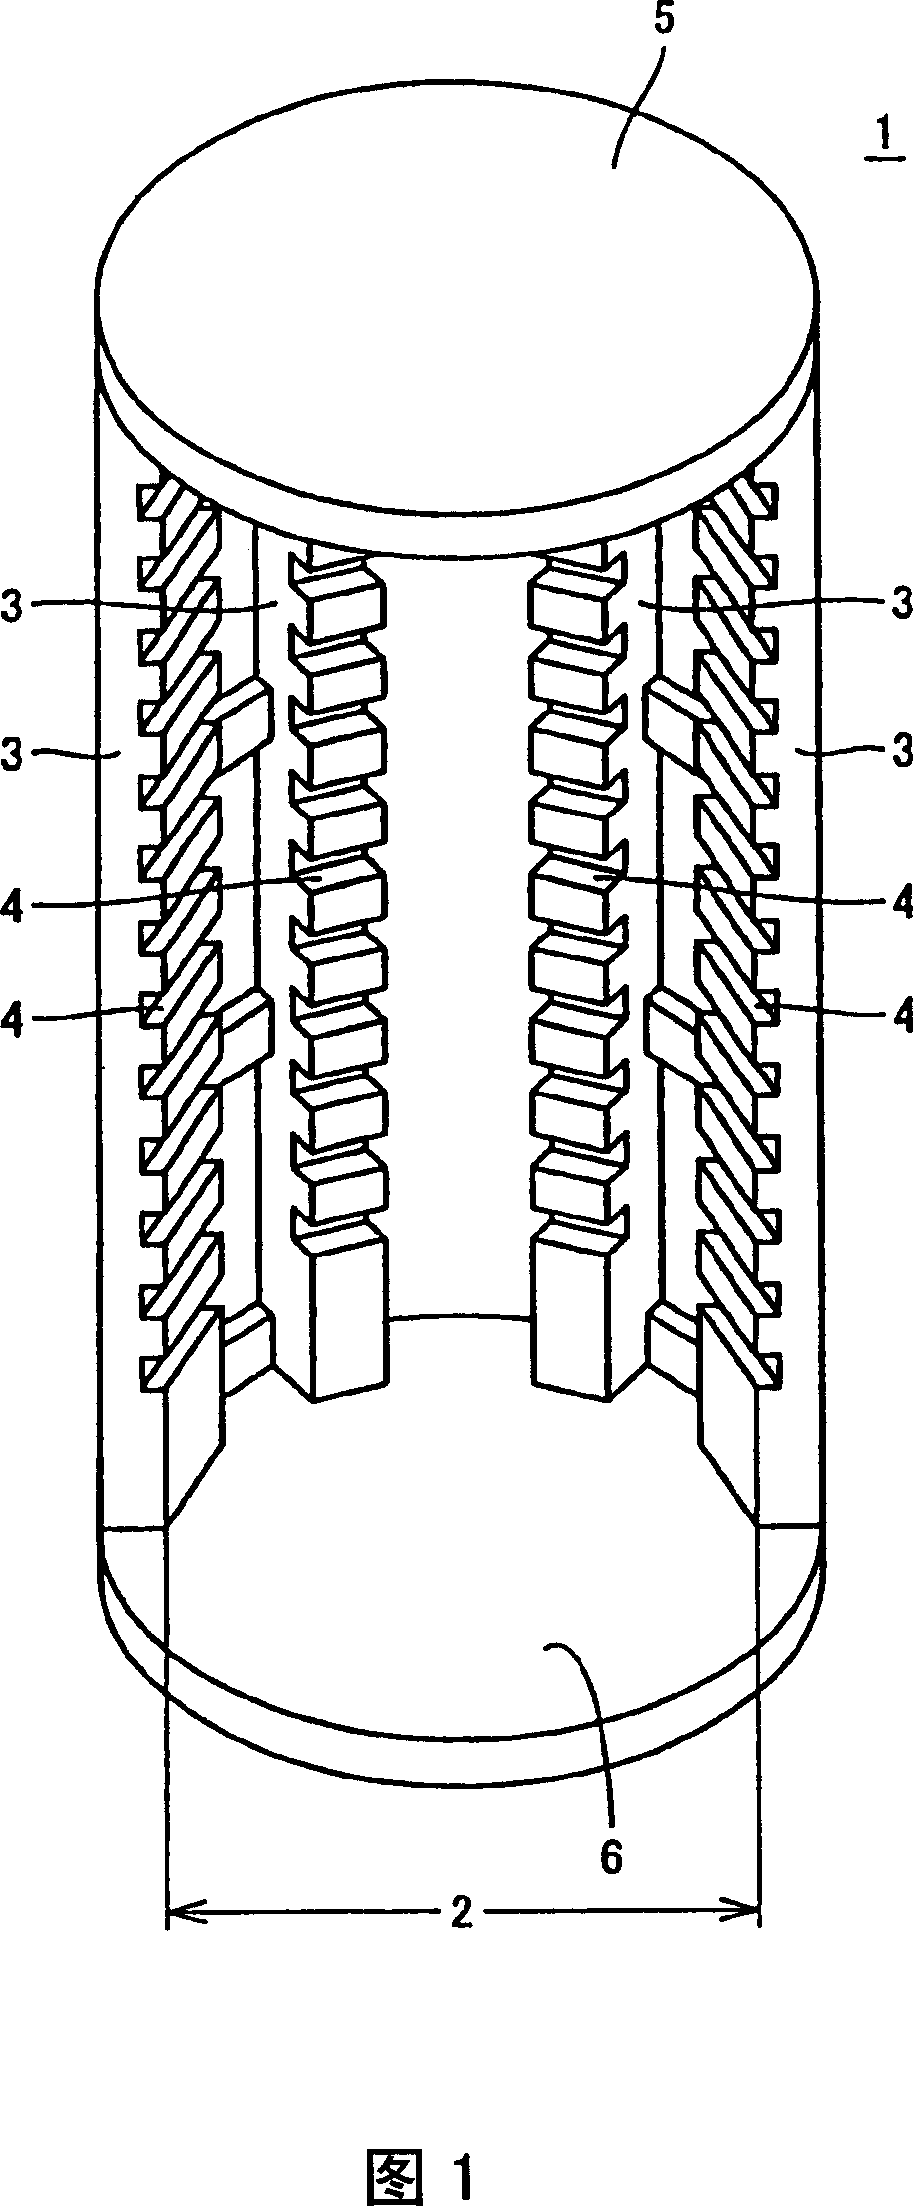 Heat treatment jig for silicon semiconductor substrate